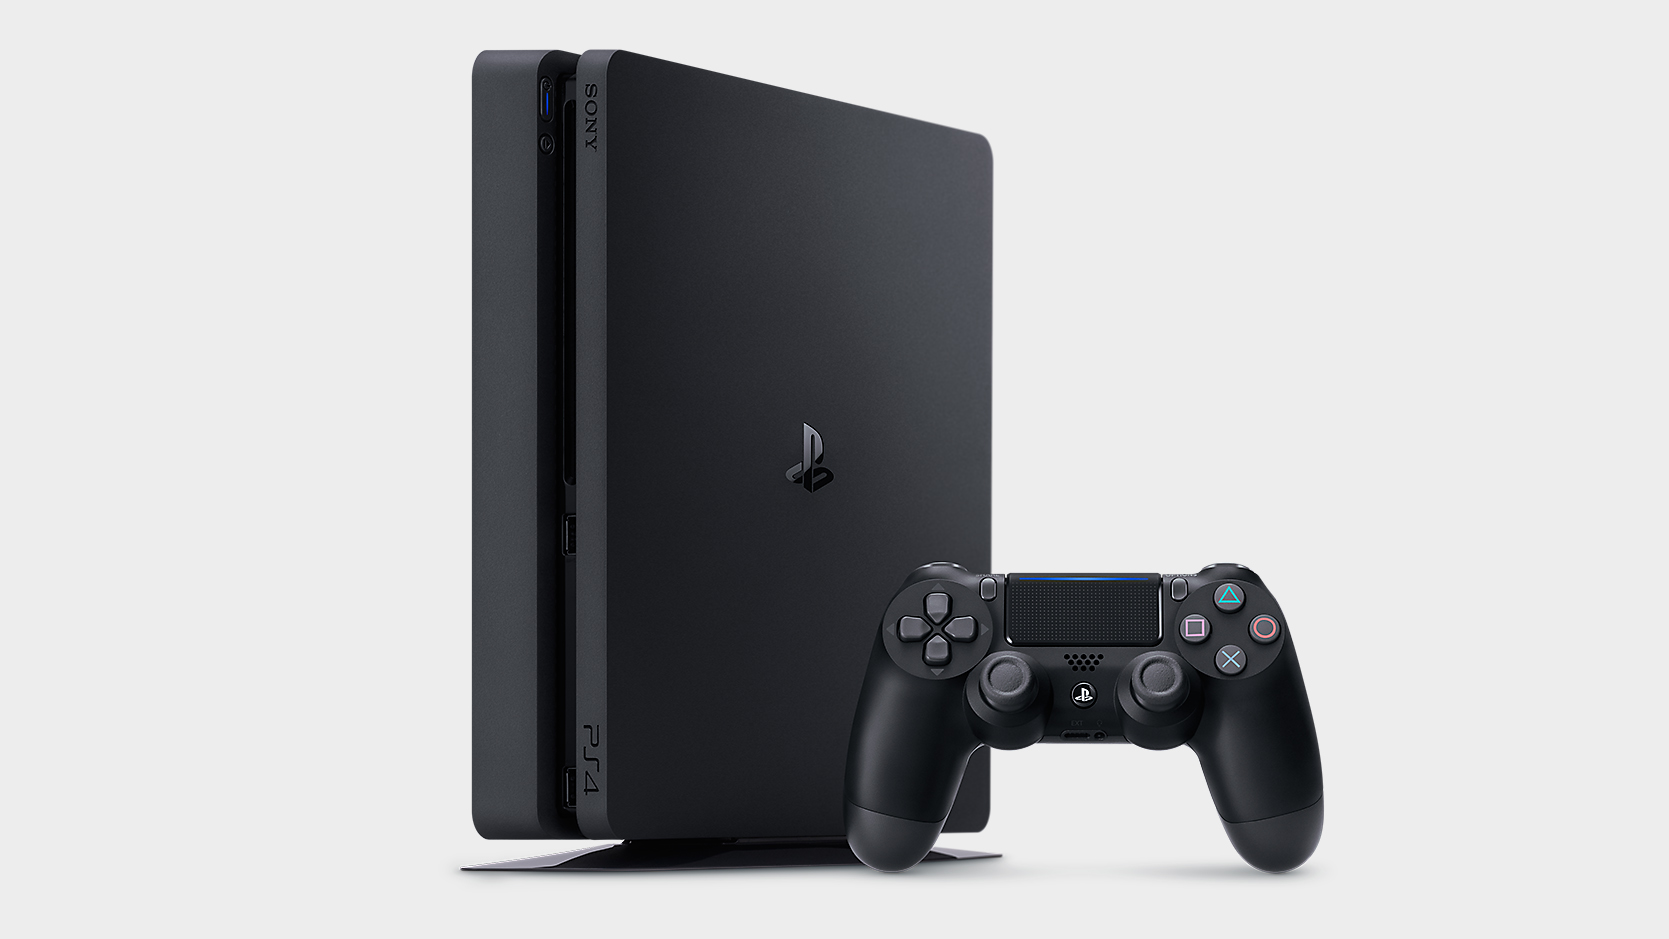 ps4 slim 1tb review